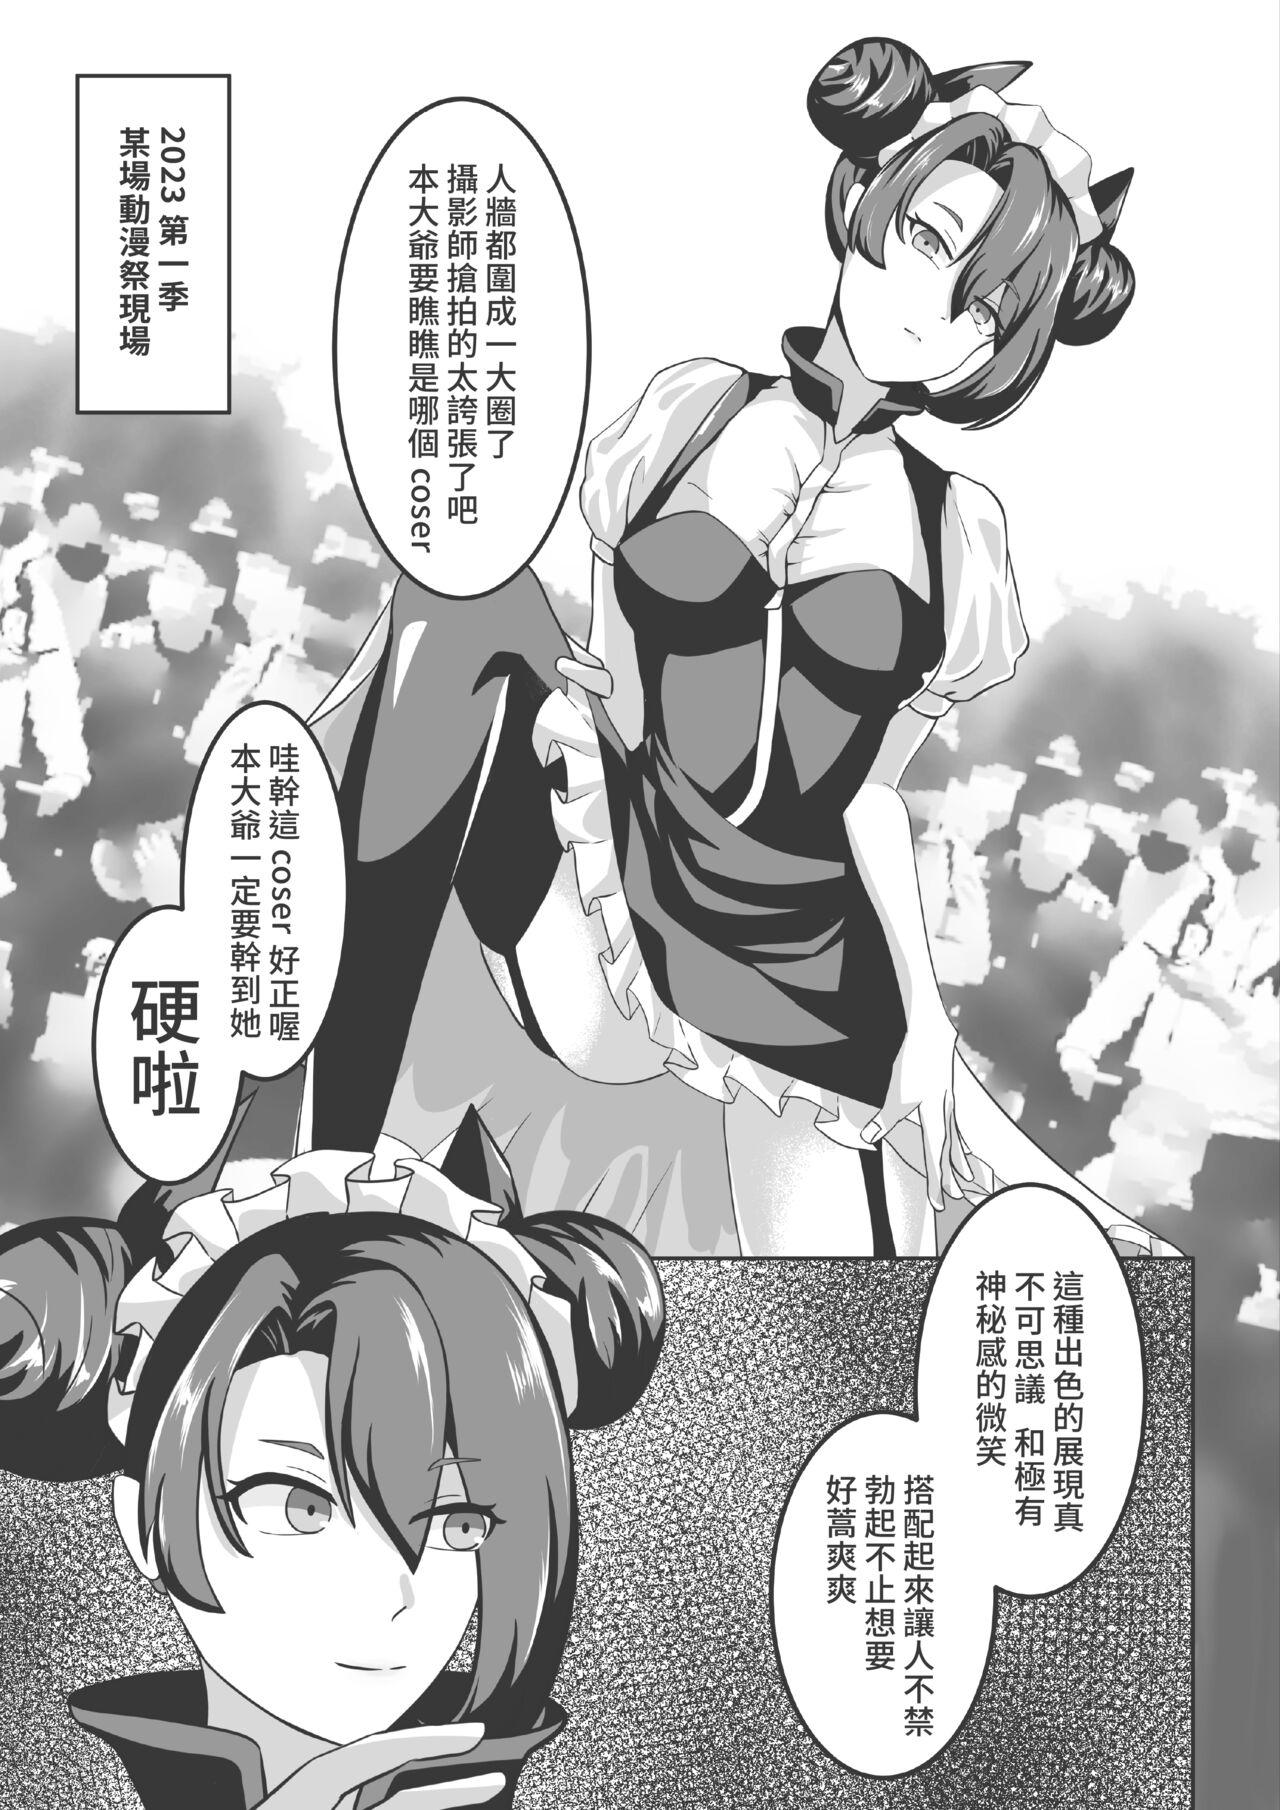 Buceta Sex with Agent - Girls frontline Dance - Page 2